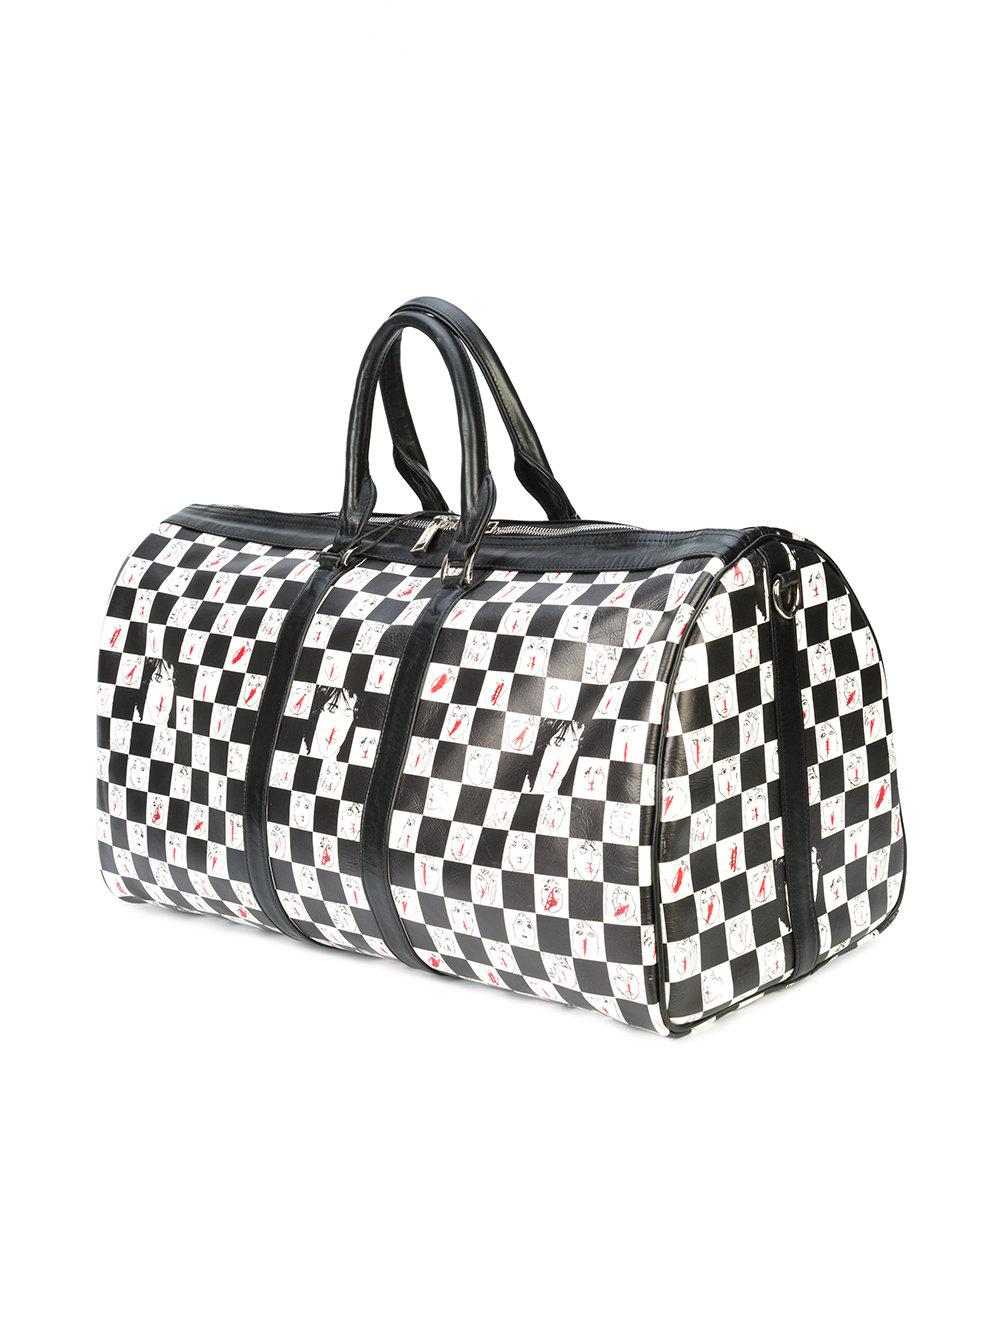 Enfants Riches Deprimes Leather Checkered Duffle Bag in Black - Lyst